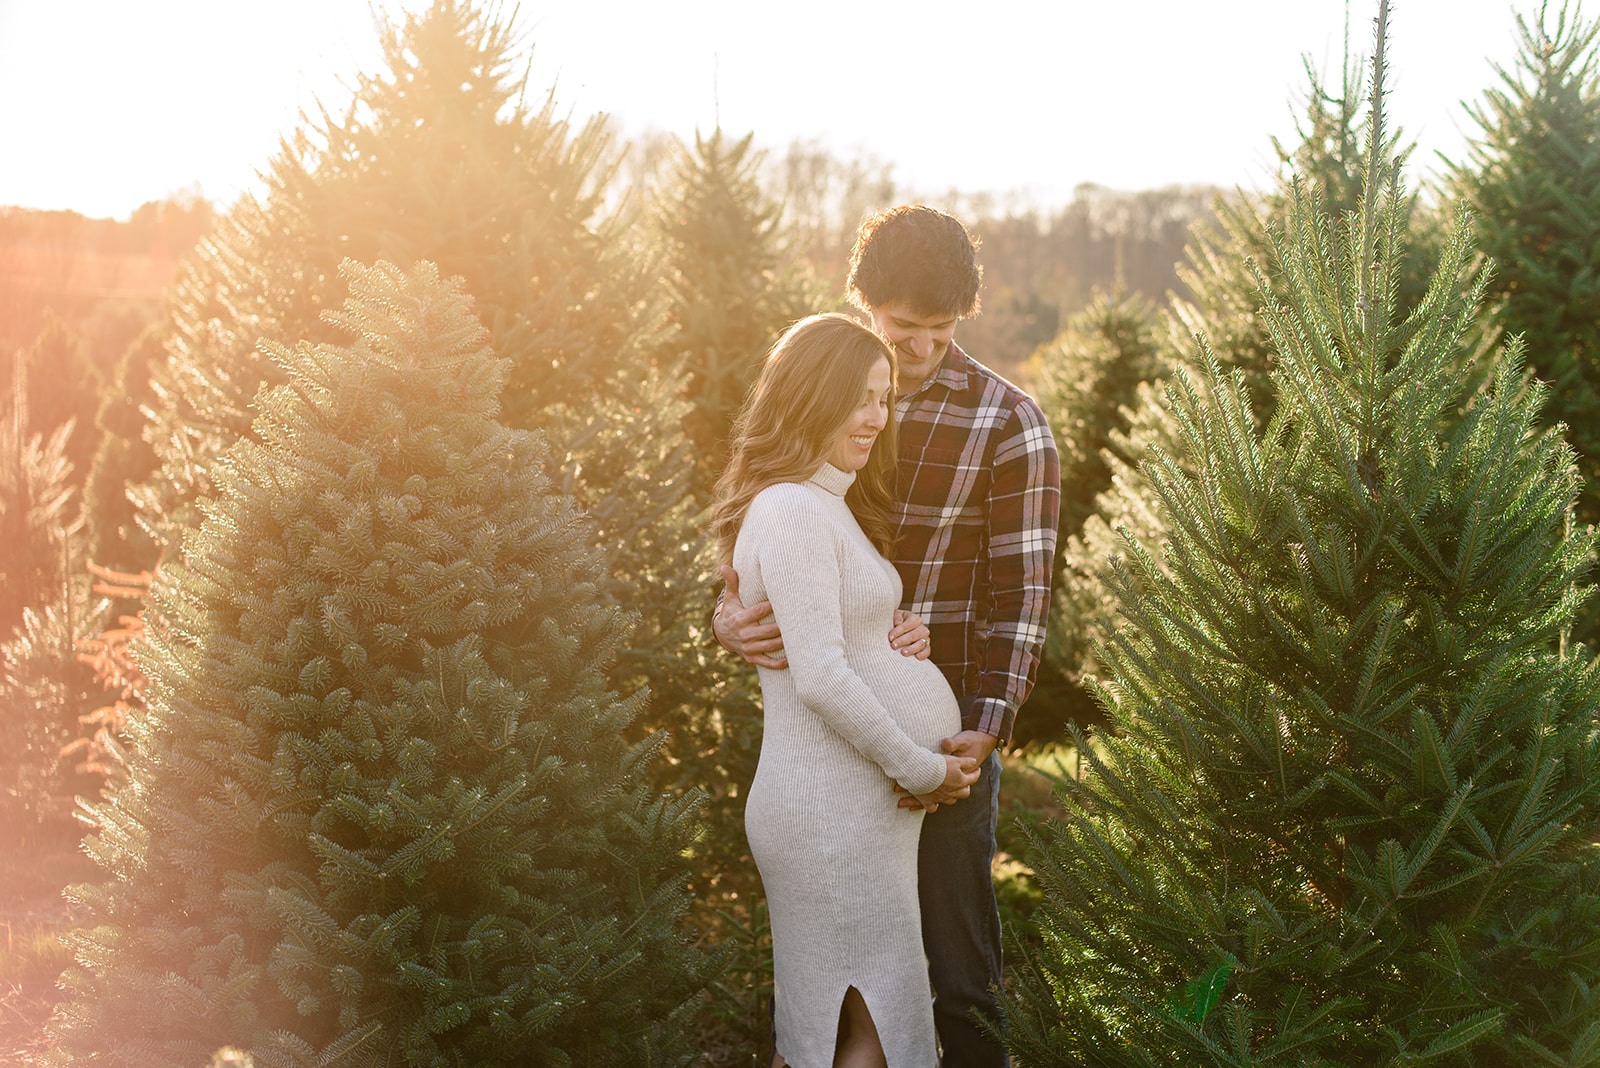 Soon-to-be parents snuggle in the Christmas trees during their maternity photoshoot with Rachel Mummert Photography